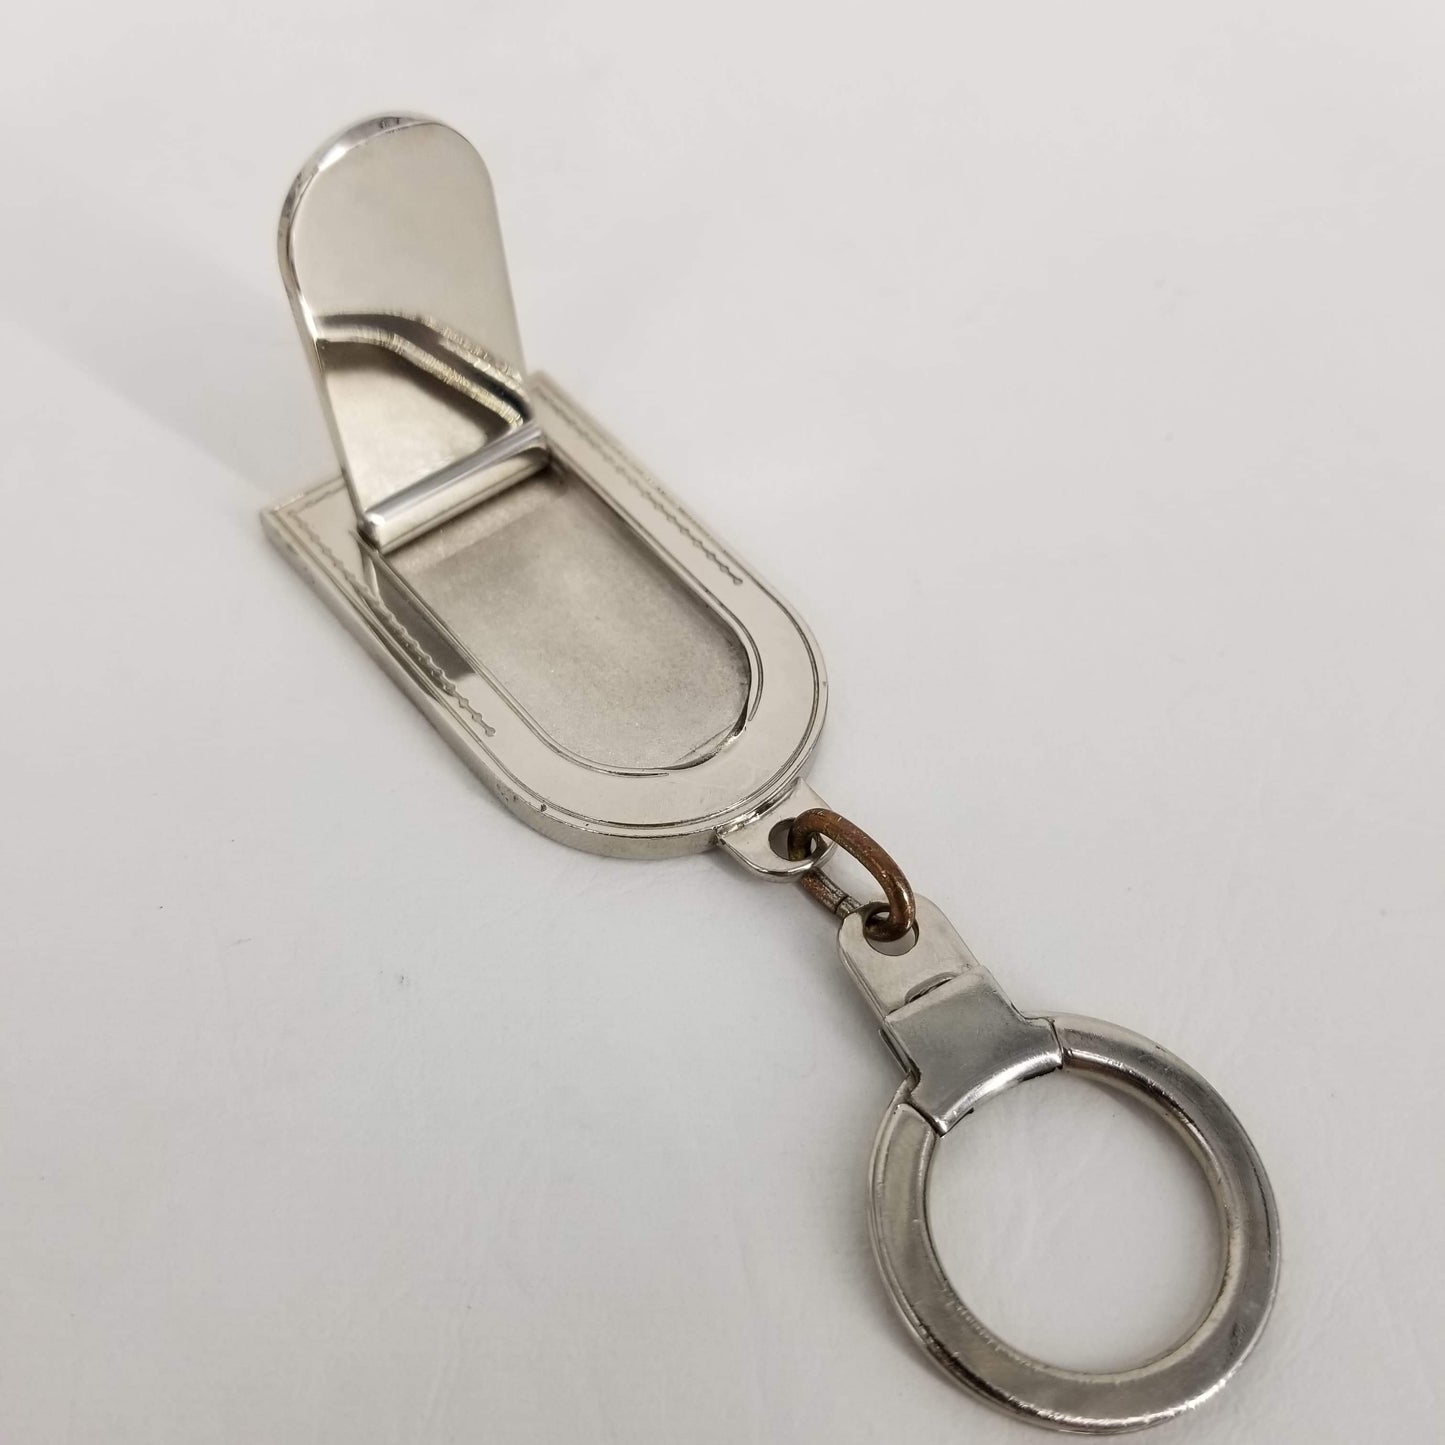 Authentic Louis Vuitton Silver-tone Luggage Tag Bag Charm